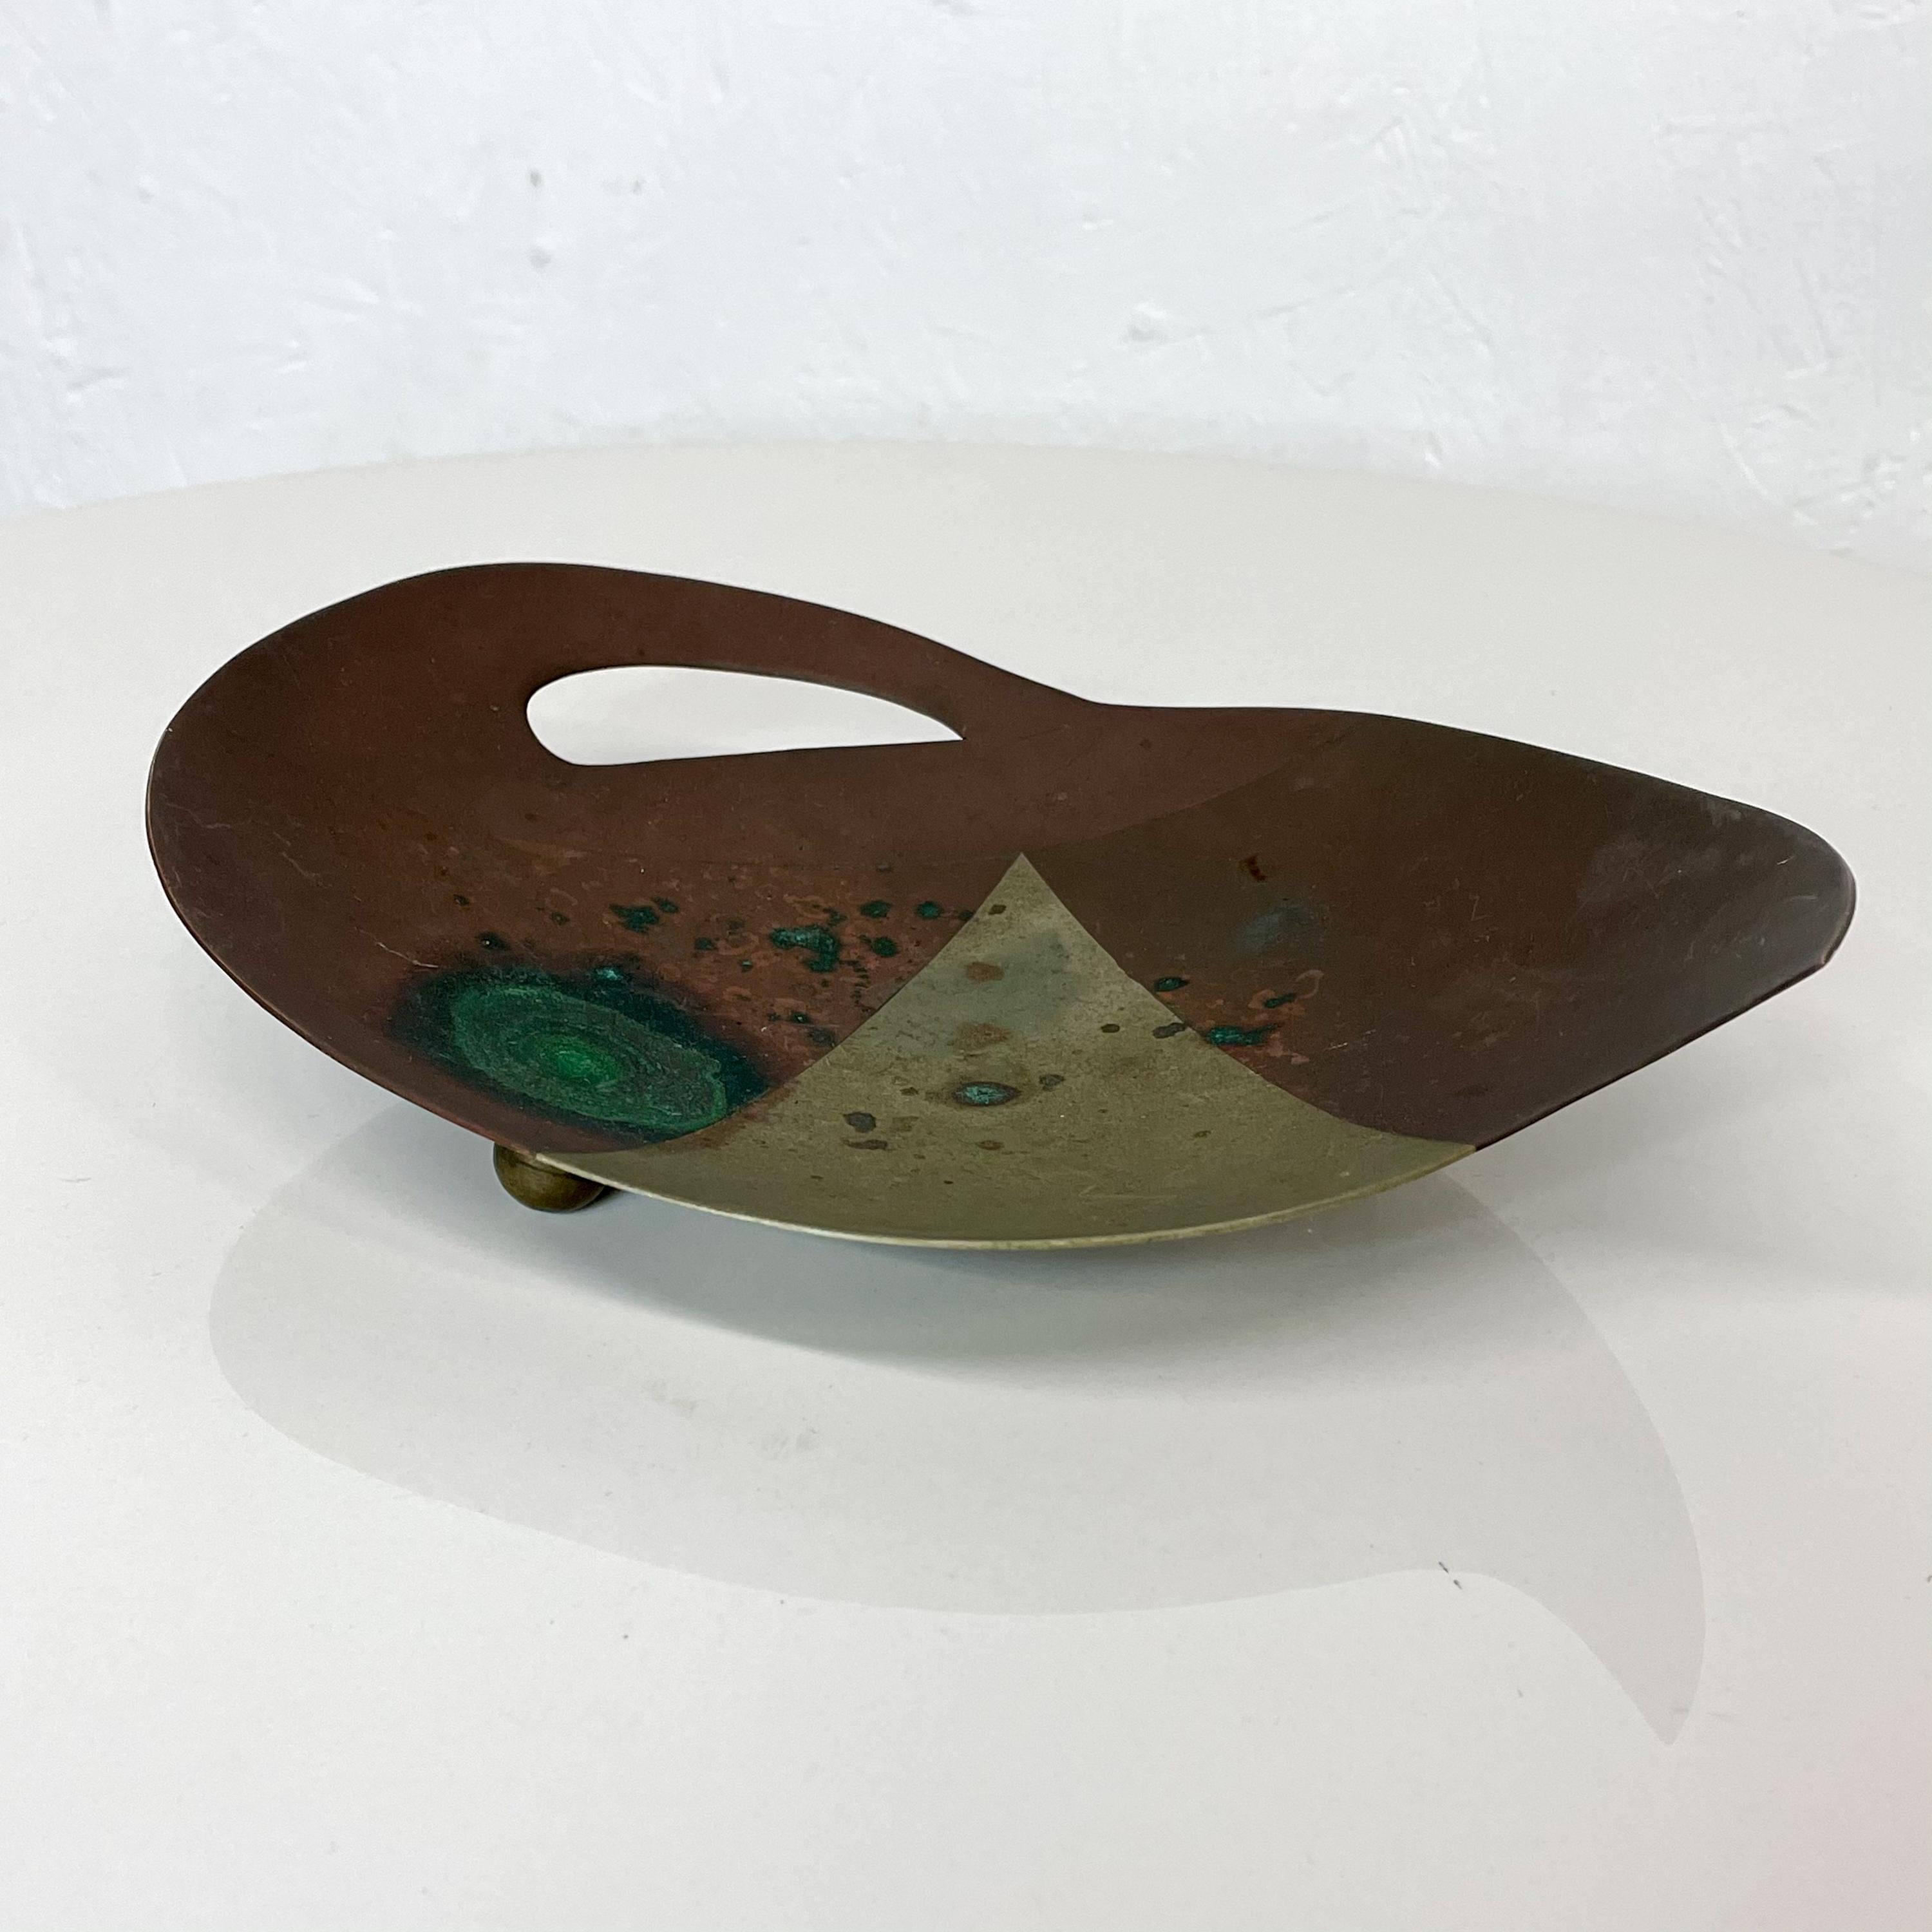 Sculptural Modernism 1950s Married Metal Footed Dish Tray-
attributed to Los Castillo
Stamped Mexico
Mixed Metals of Brass, Stainless Steel and Copper.
Patinated Finish with Verdigris patina.
8.75D x 6W x 2.13 H
Original Unrestored Fair Vintage